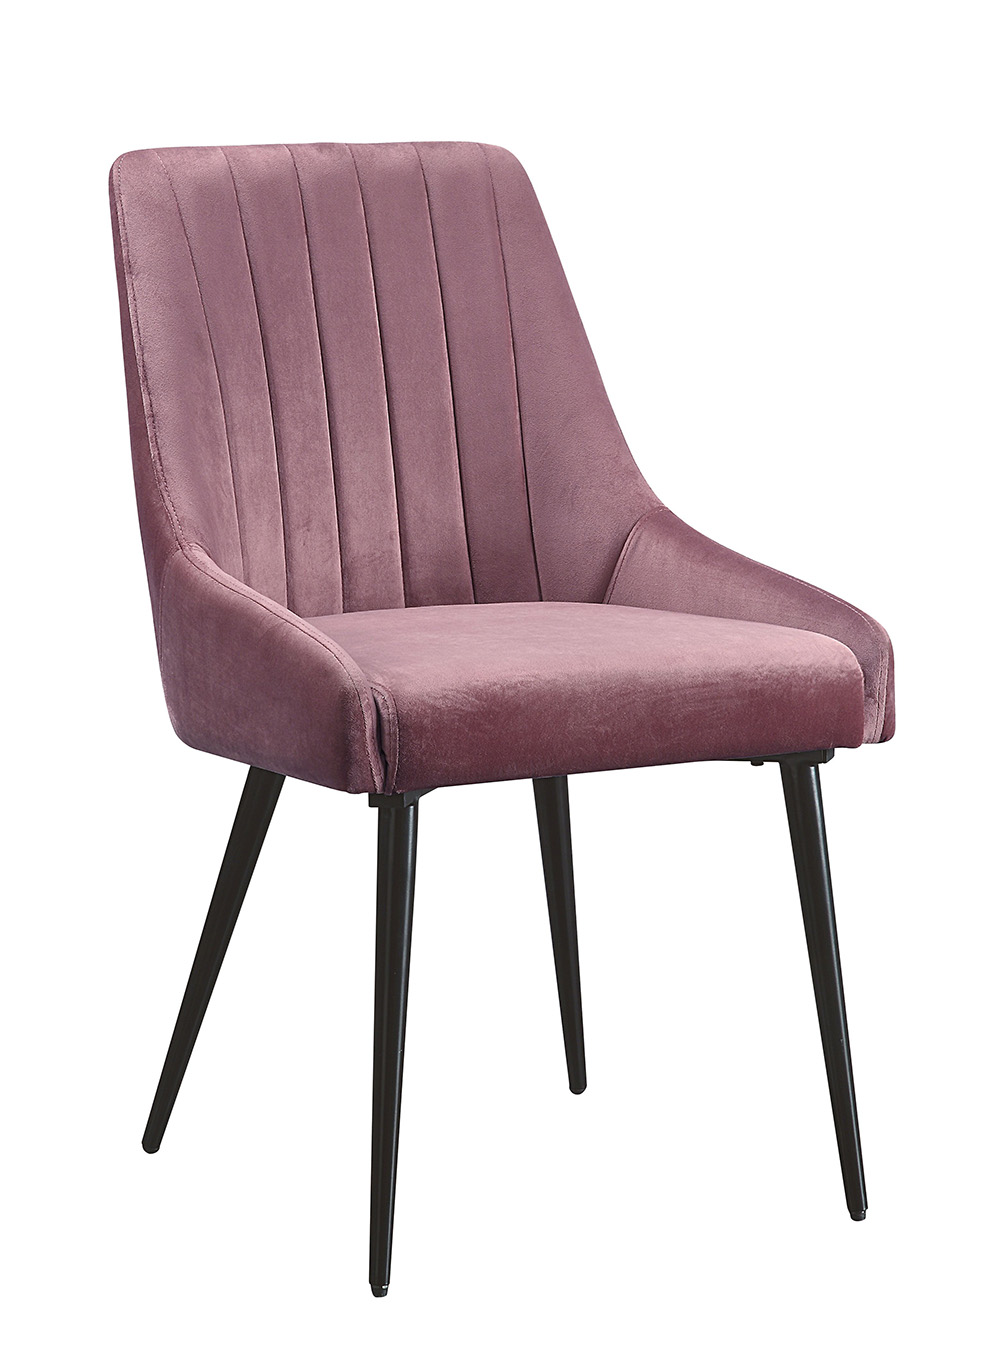 ACME Caspian Fabric Upholstered Dining Chair Set of 2, with Curved Backrest, and Metal Legs, for Restaurant, Cafe, Tavern, Office, Living Room - Pink